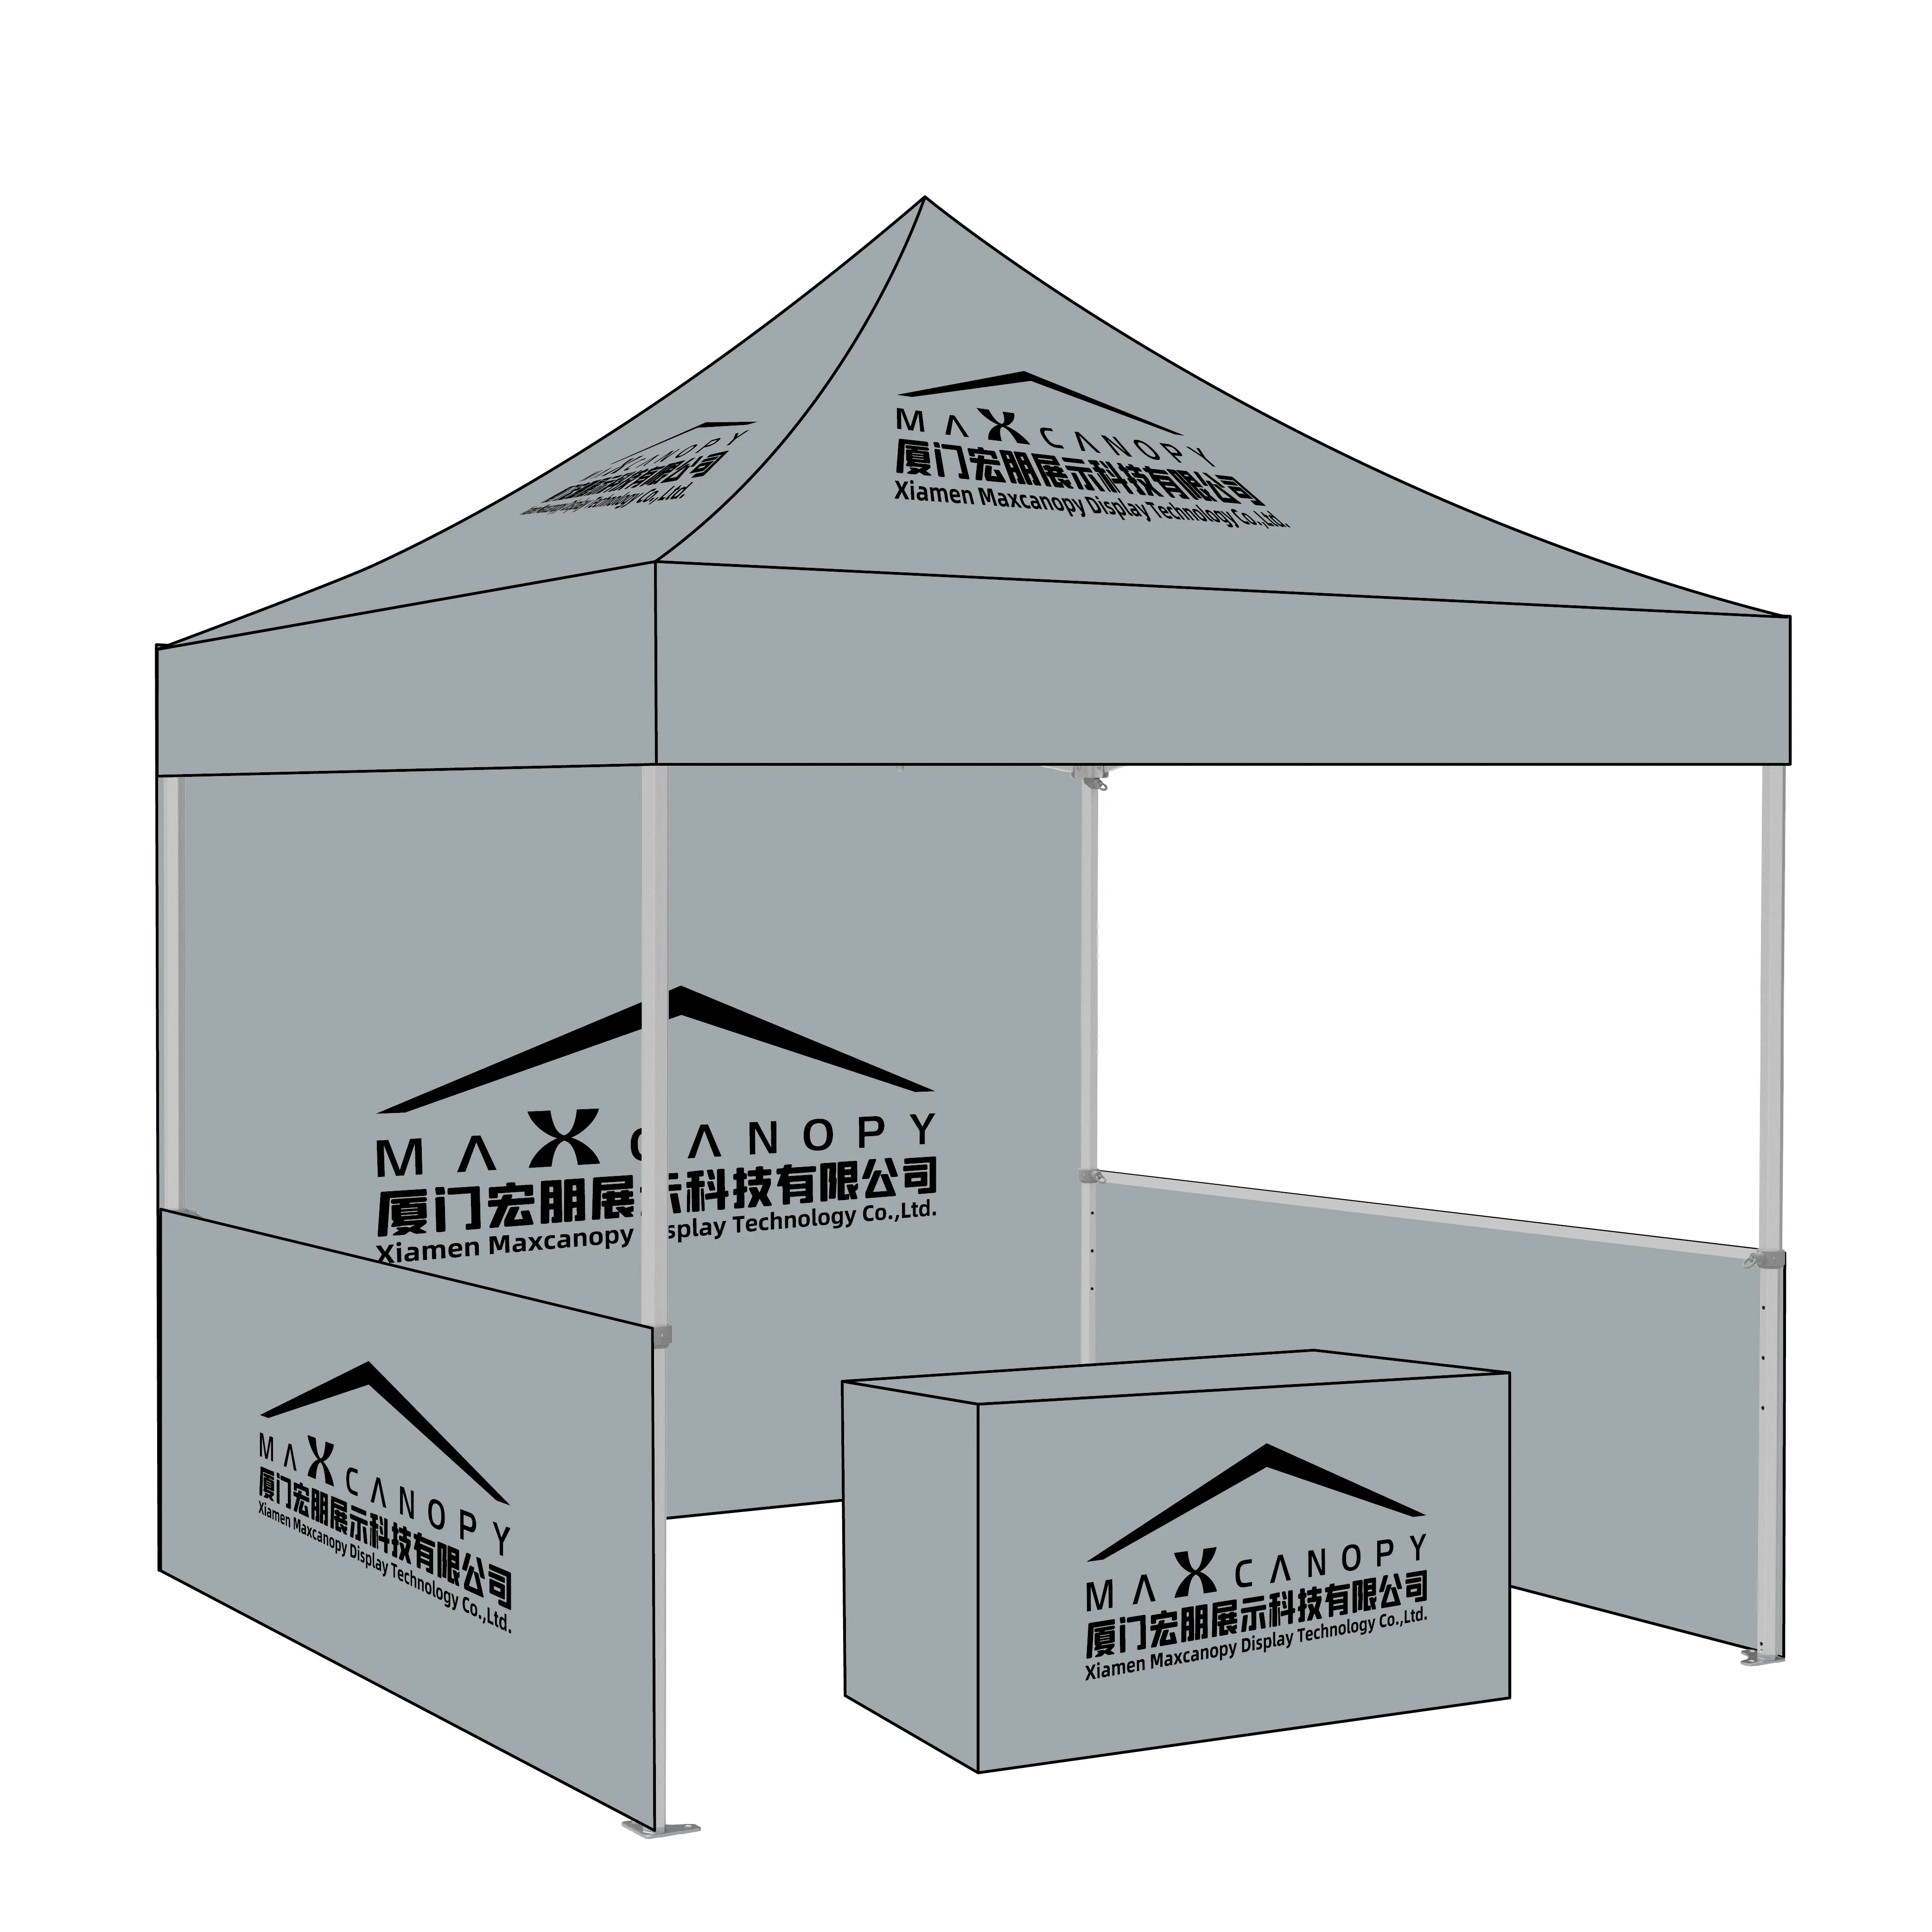 3x3 Custom Printed Promotional Folding Awning Pop-Up Gazebo Canopy Display for Trade Show Tents Event Promotion